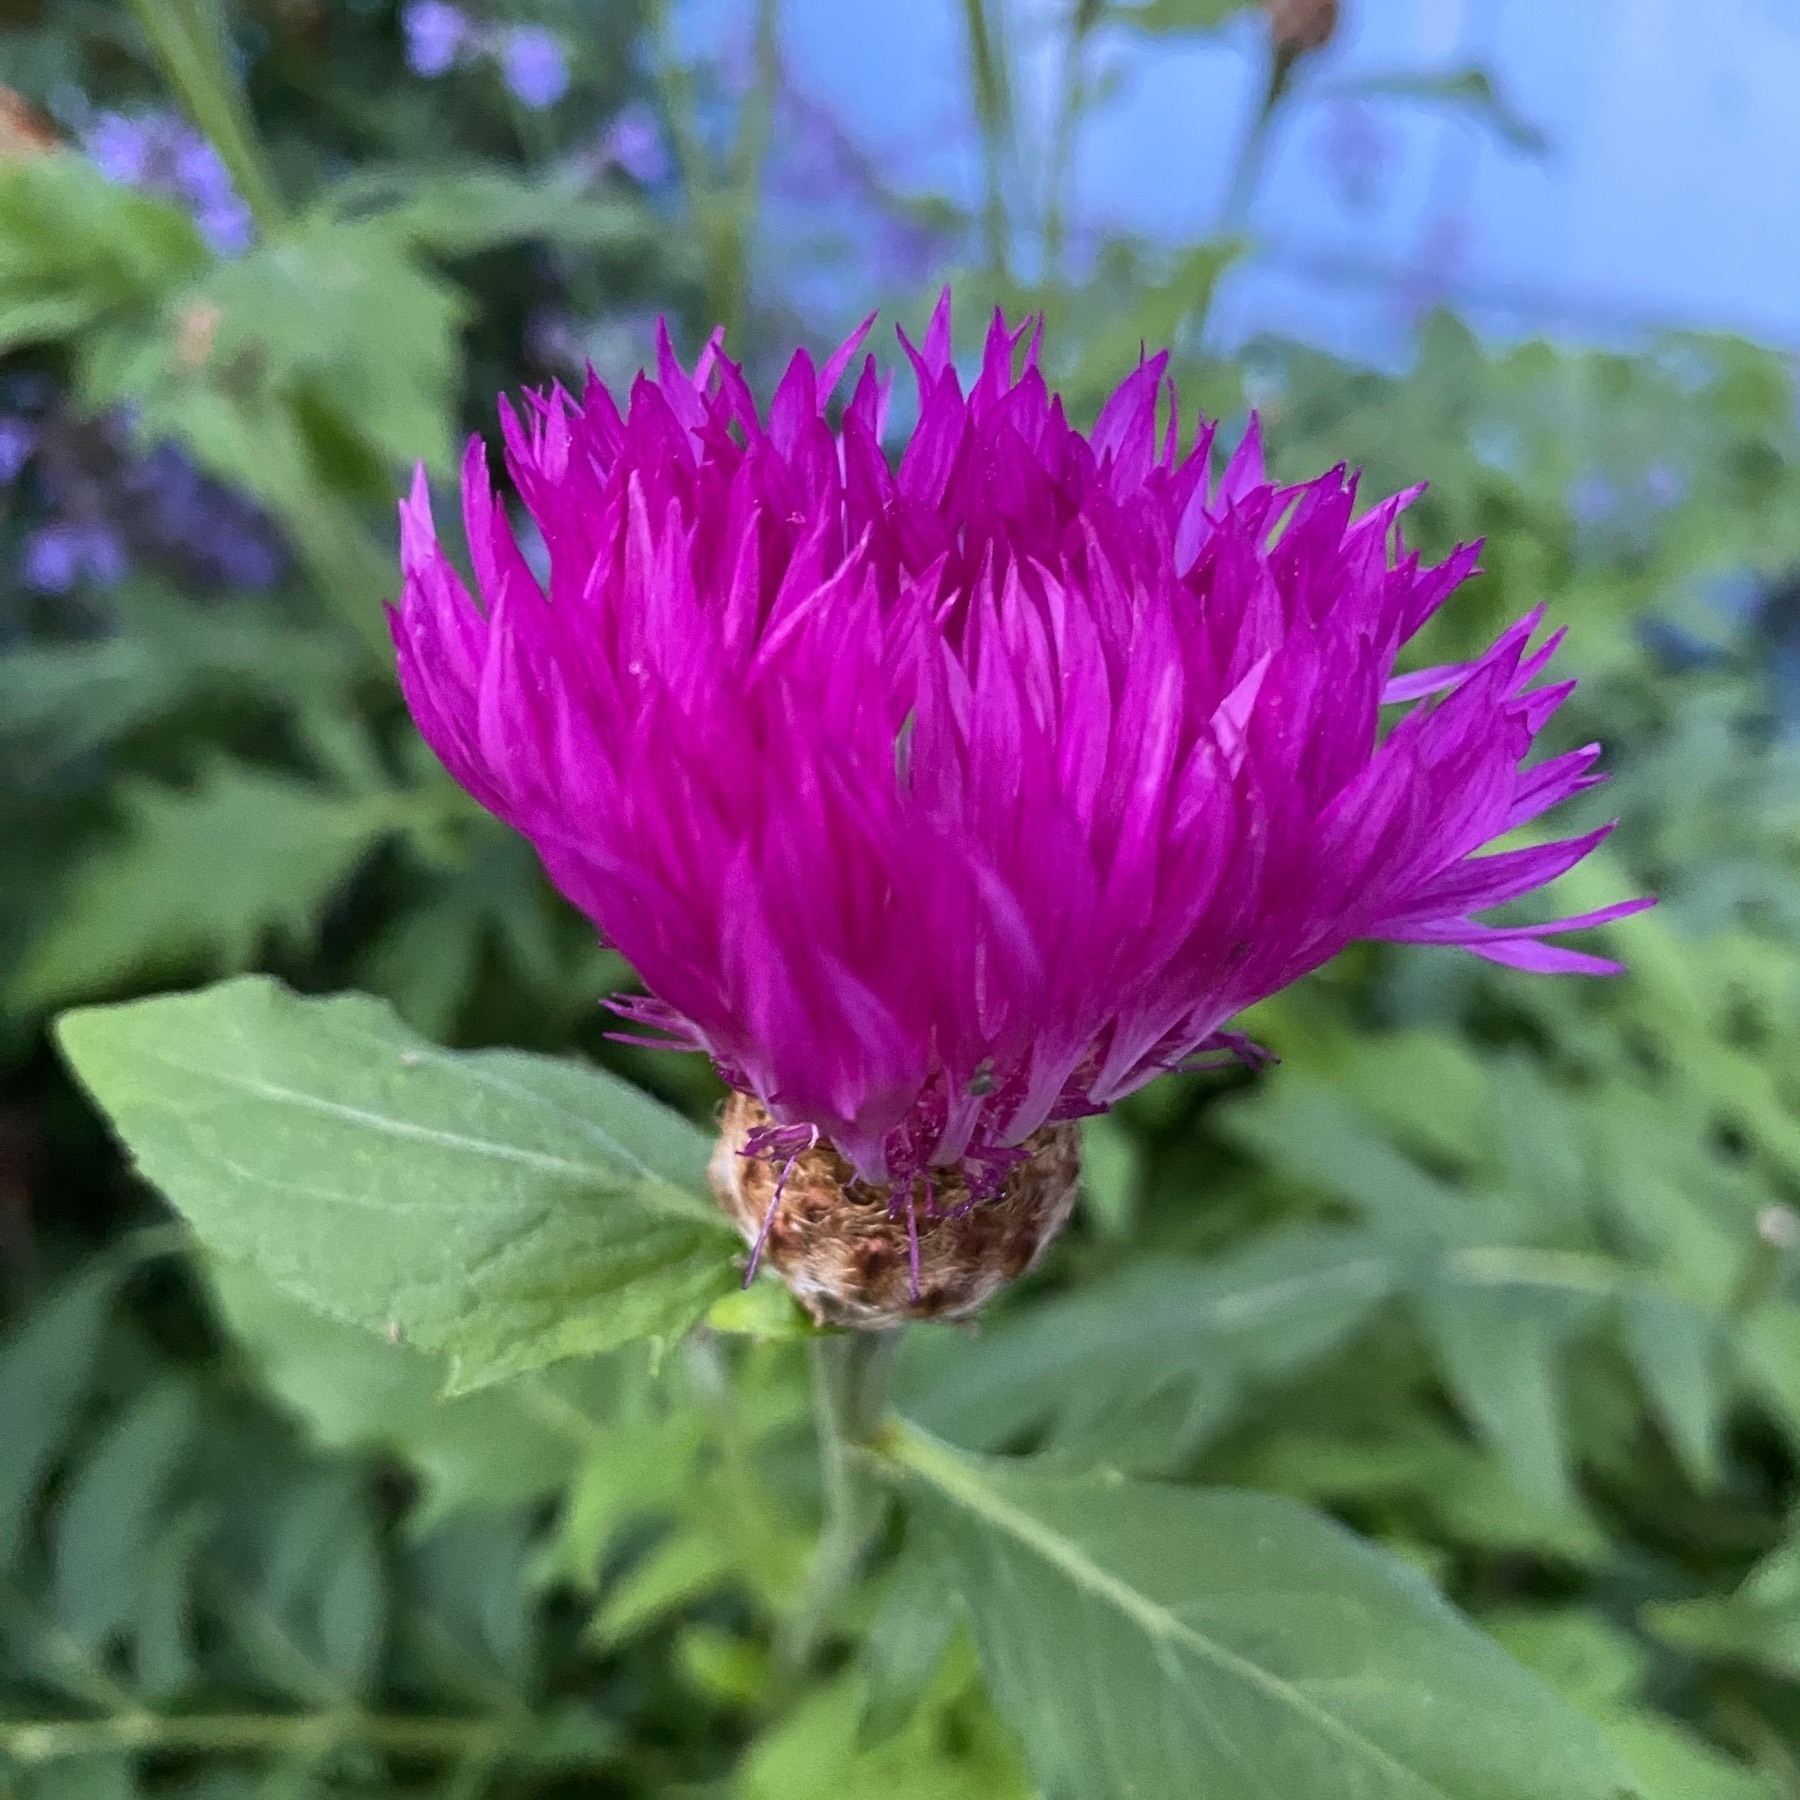 Close up view of a bright purple flower with many spiky petals.